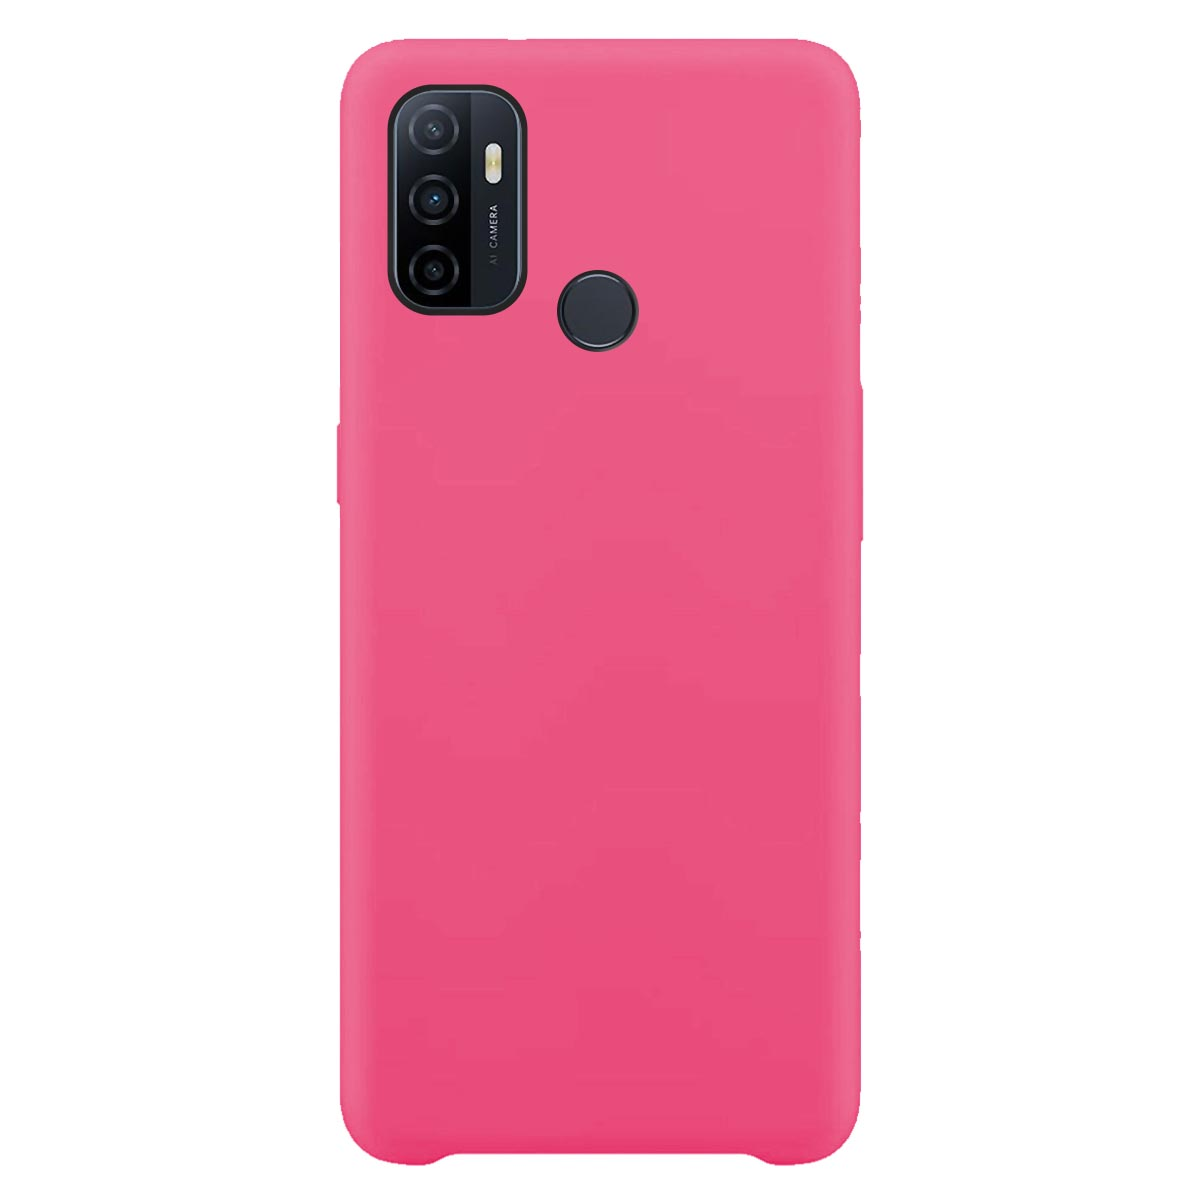 A53, MORE Backcover, Oppo, Liquid Case, Hot MTB Pink Silikon A53s, ENERGY